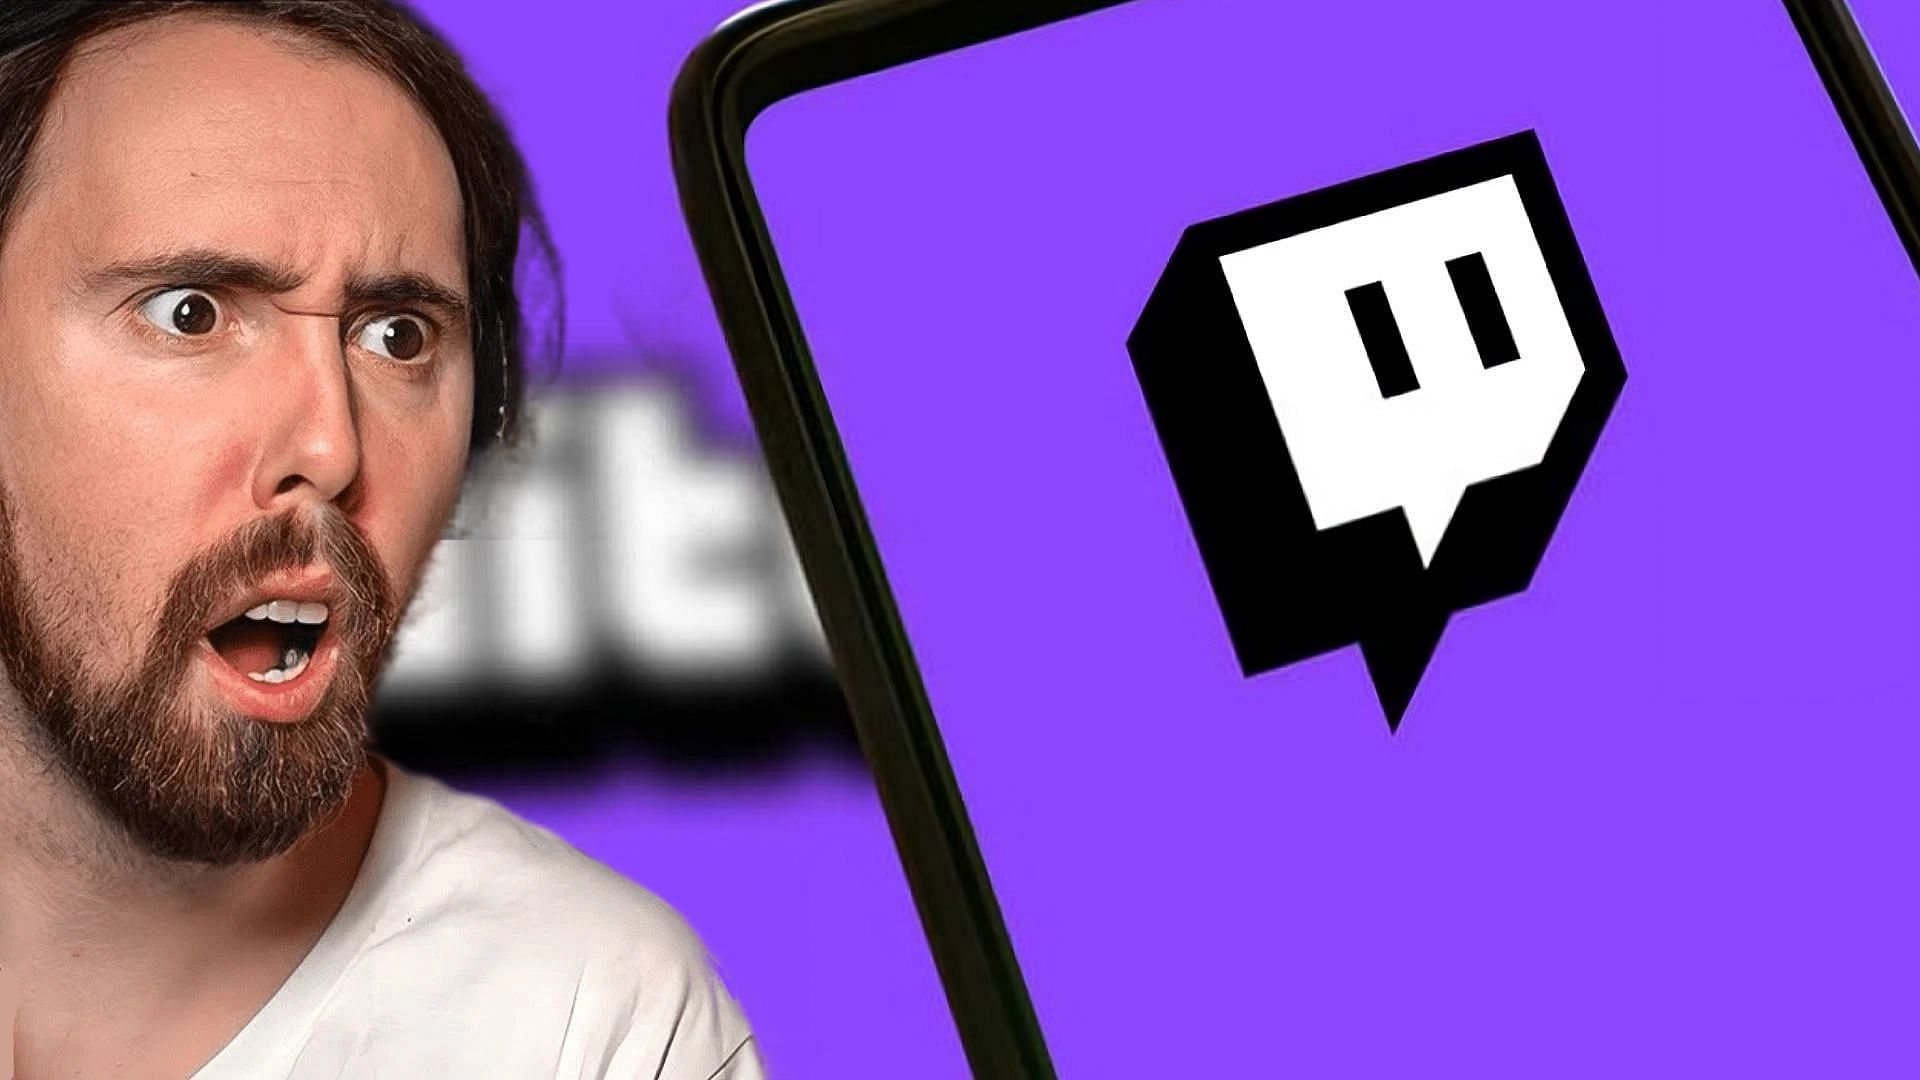 Asmongold calls on streamers to boycott Twitch in protest for new branded content policy (Image via Sportskeeda)